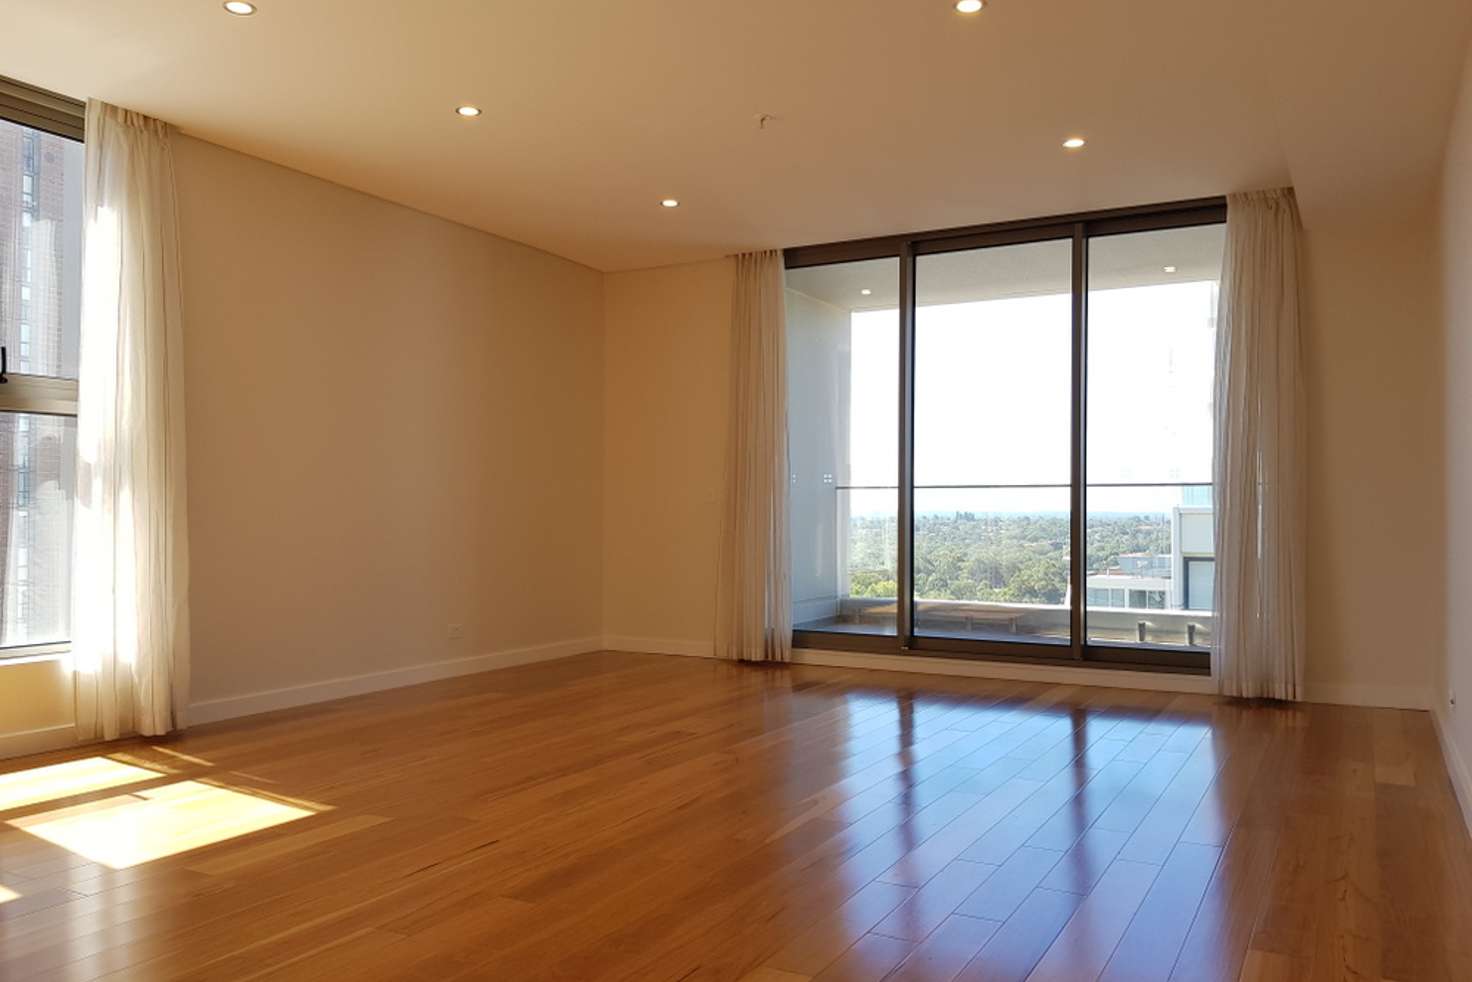 Main view of Homely apartment listing, 801/5 Atchison St, St Leonards NSW 2065